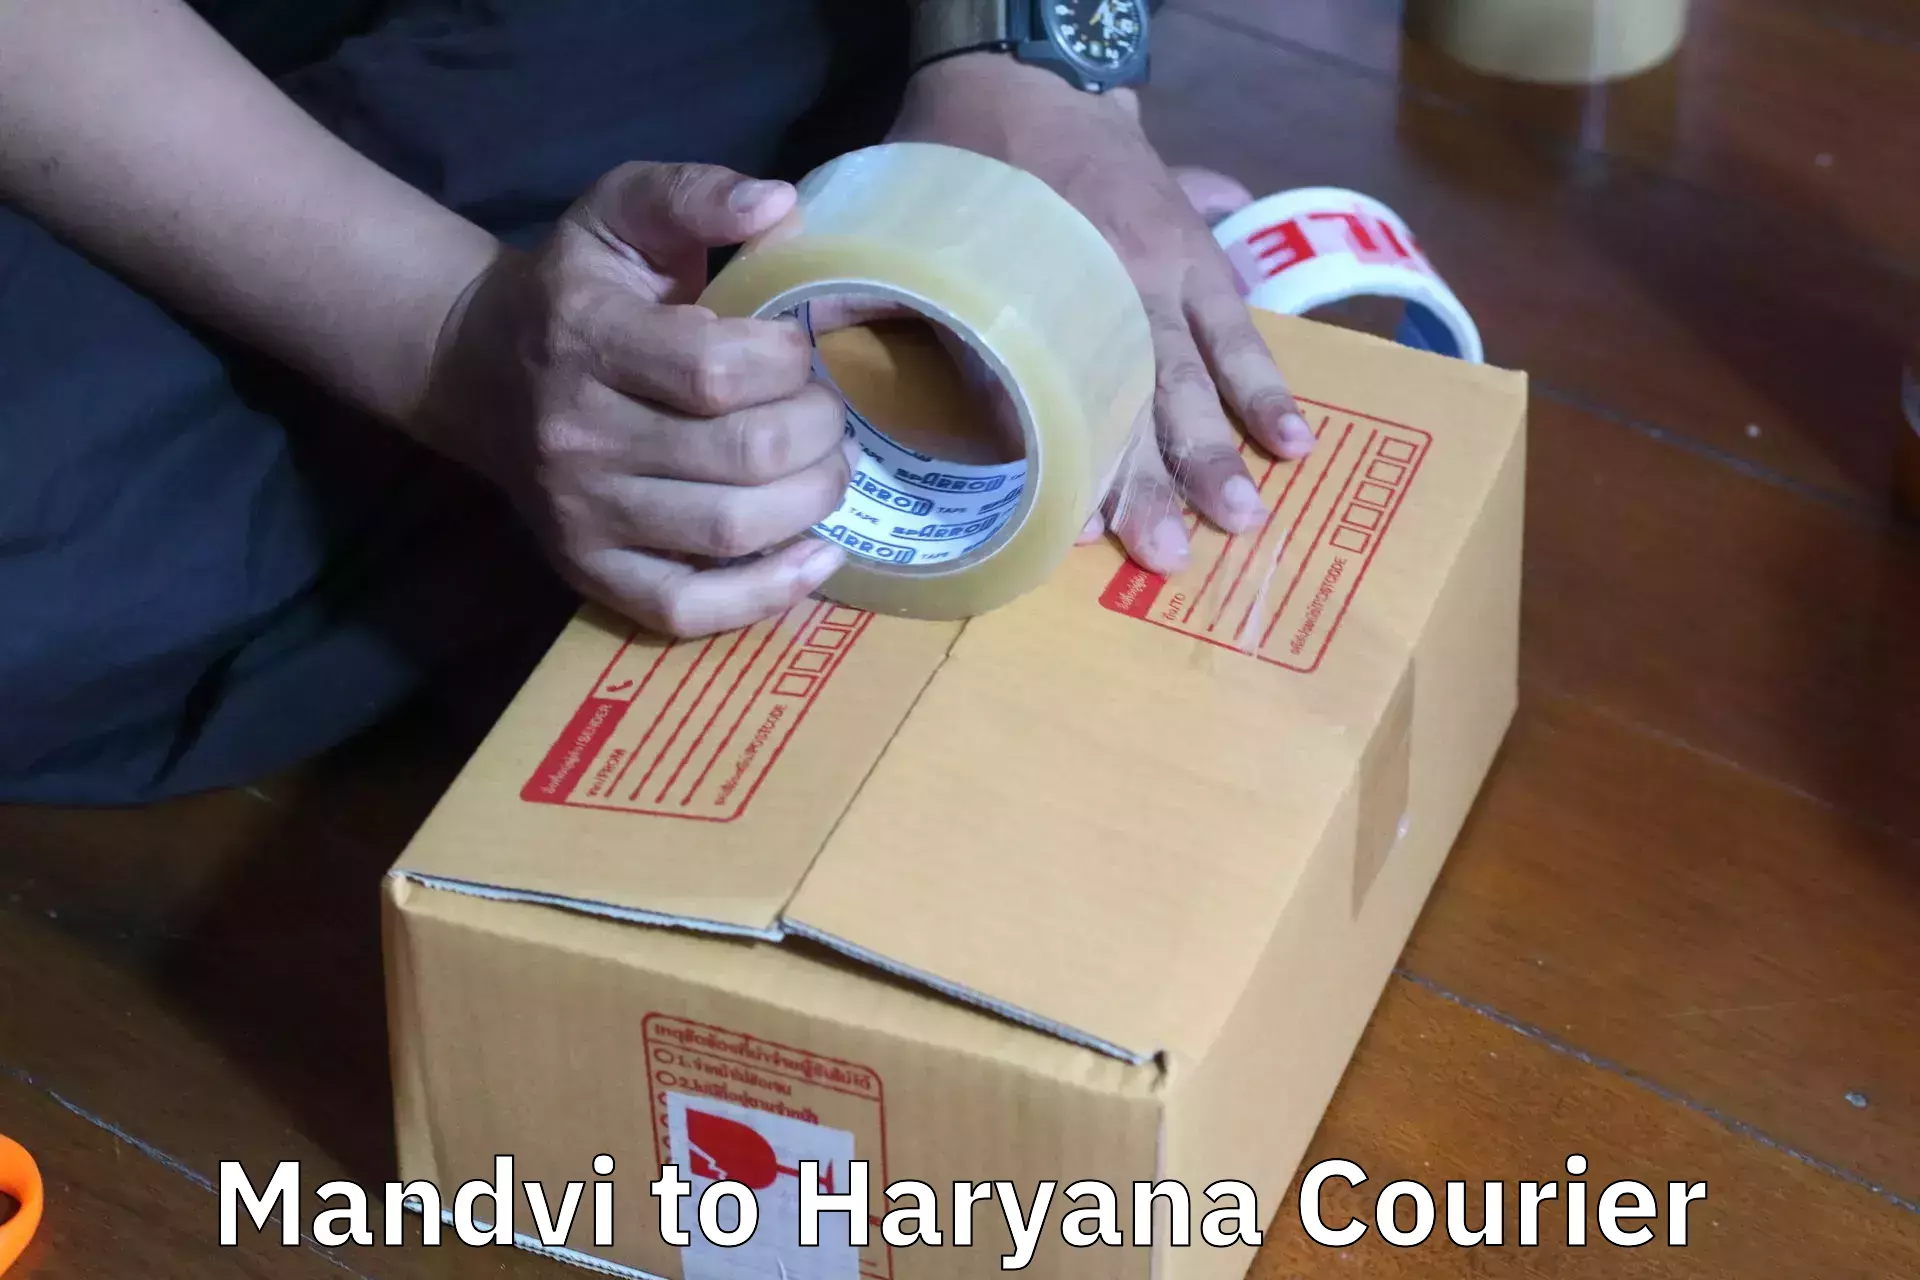 Professional packing services Mandvi to Haryana